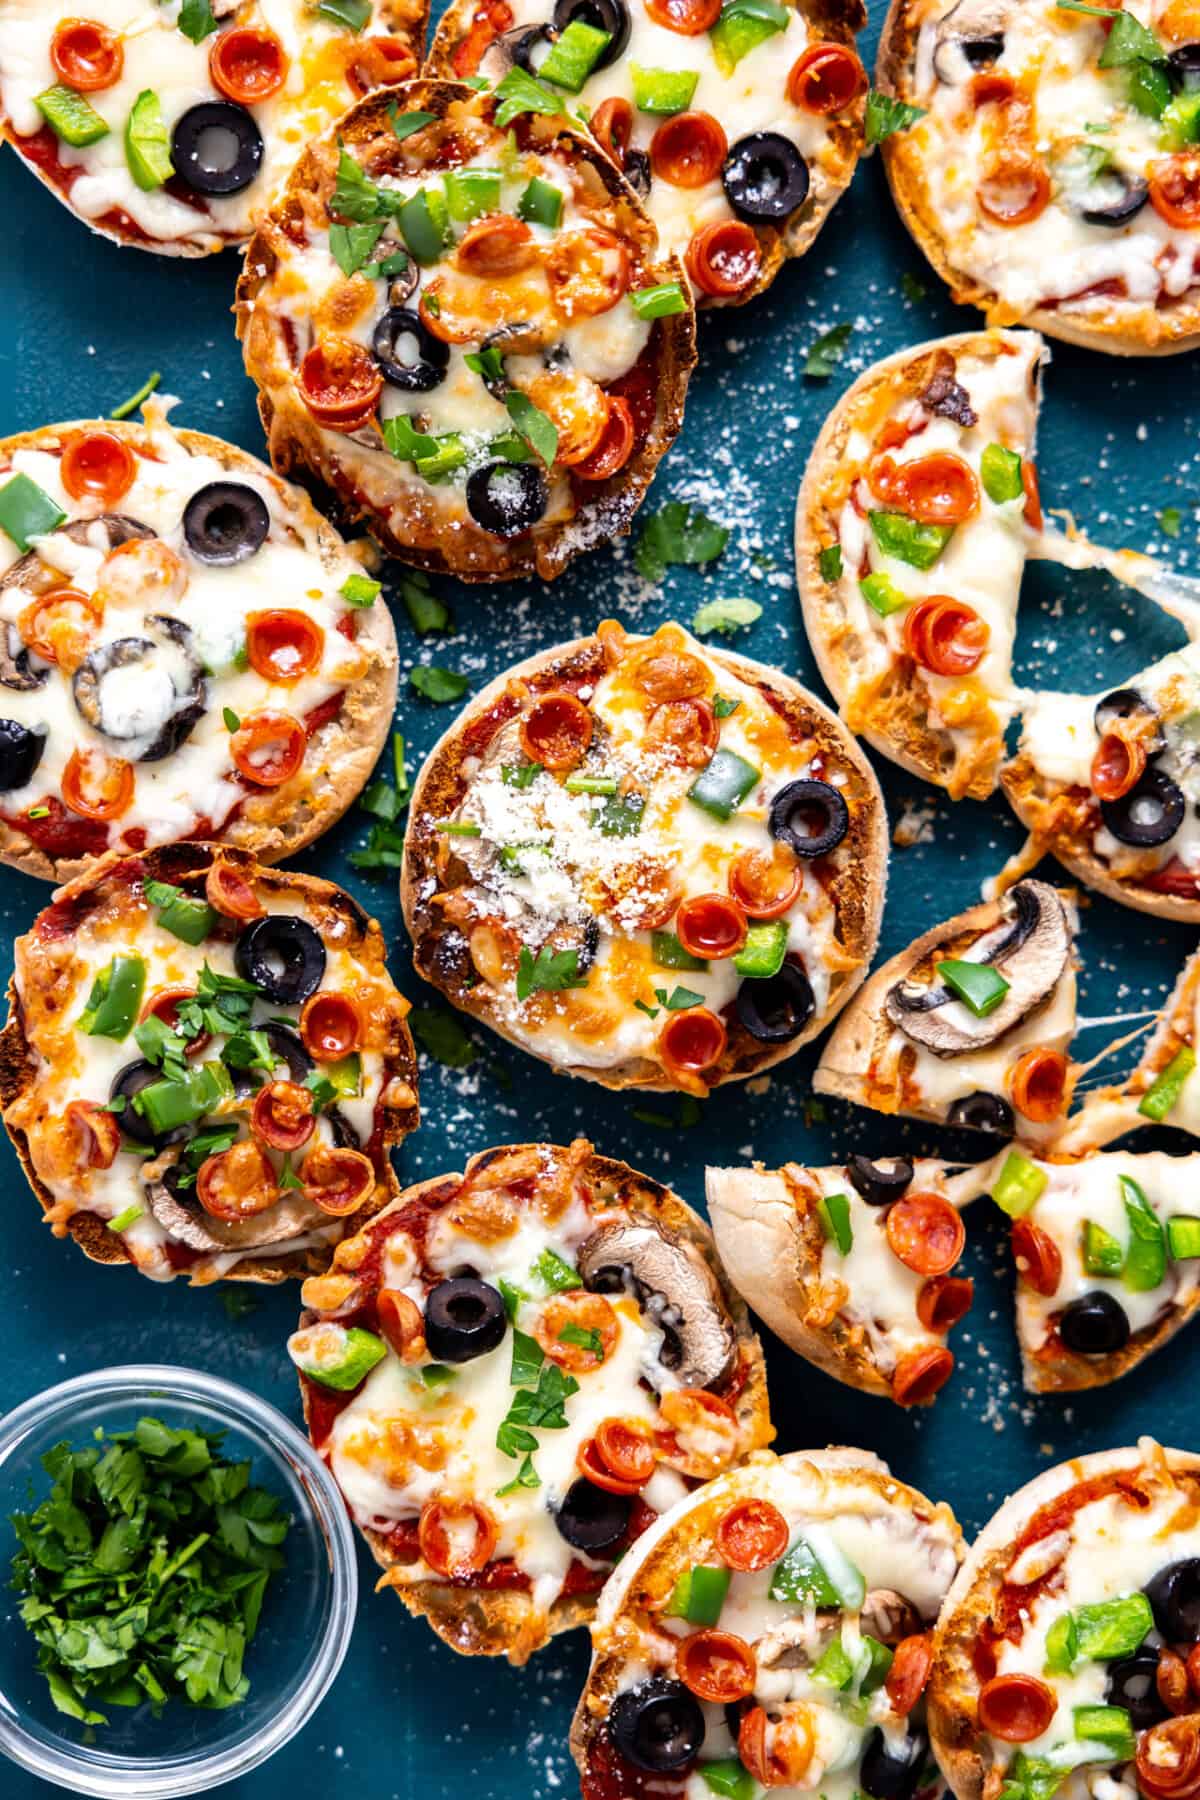 Tray of English Muffin Pizzas topped with pepperoni, bell pepper, olives and mushrooms.